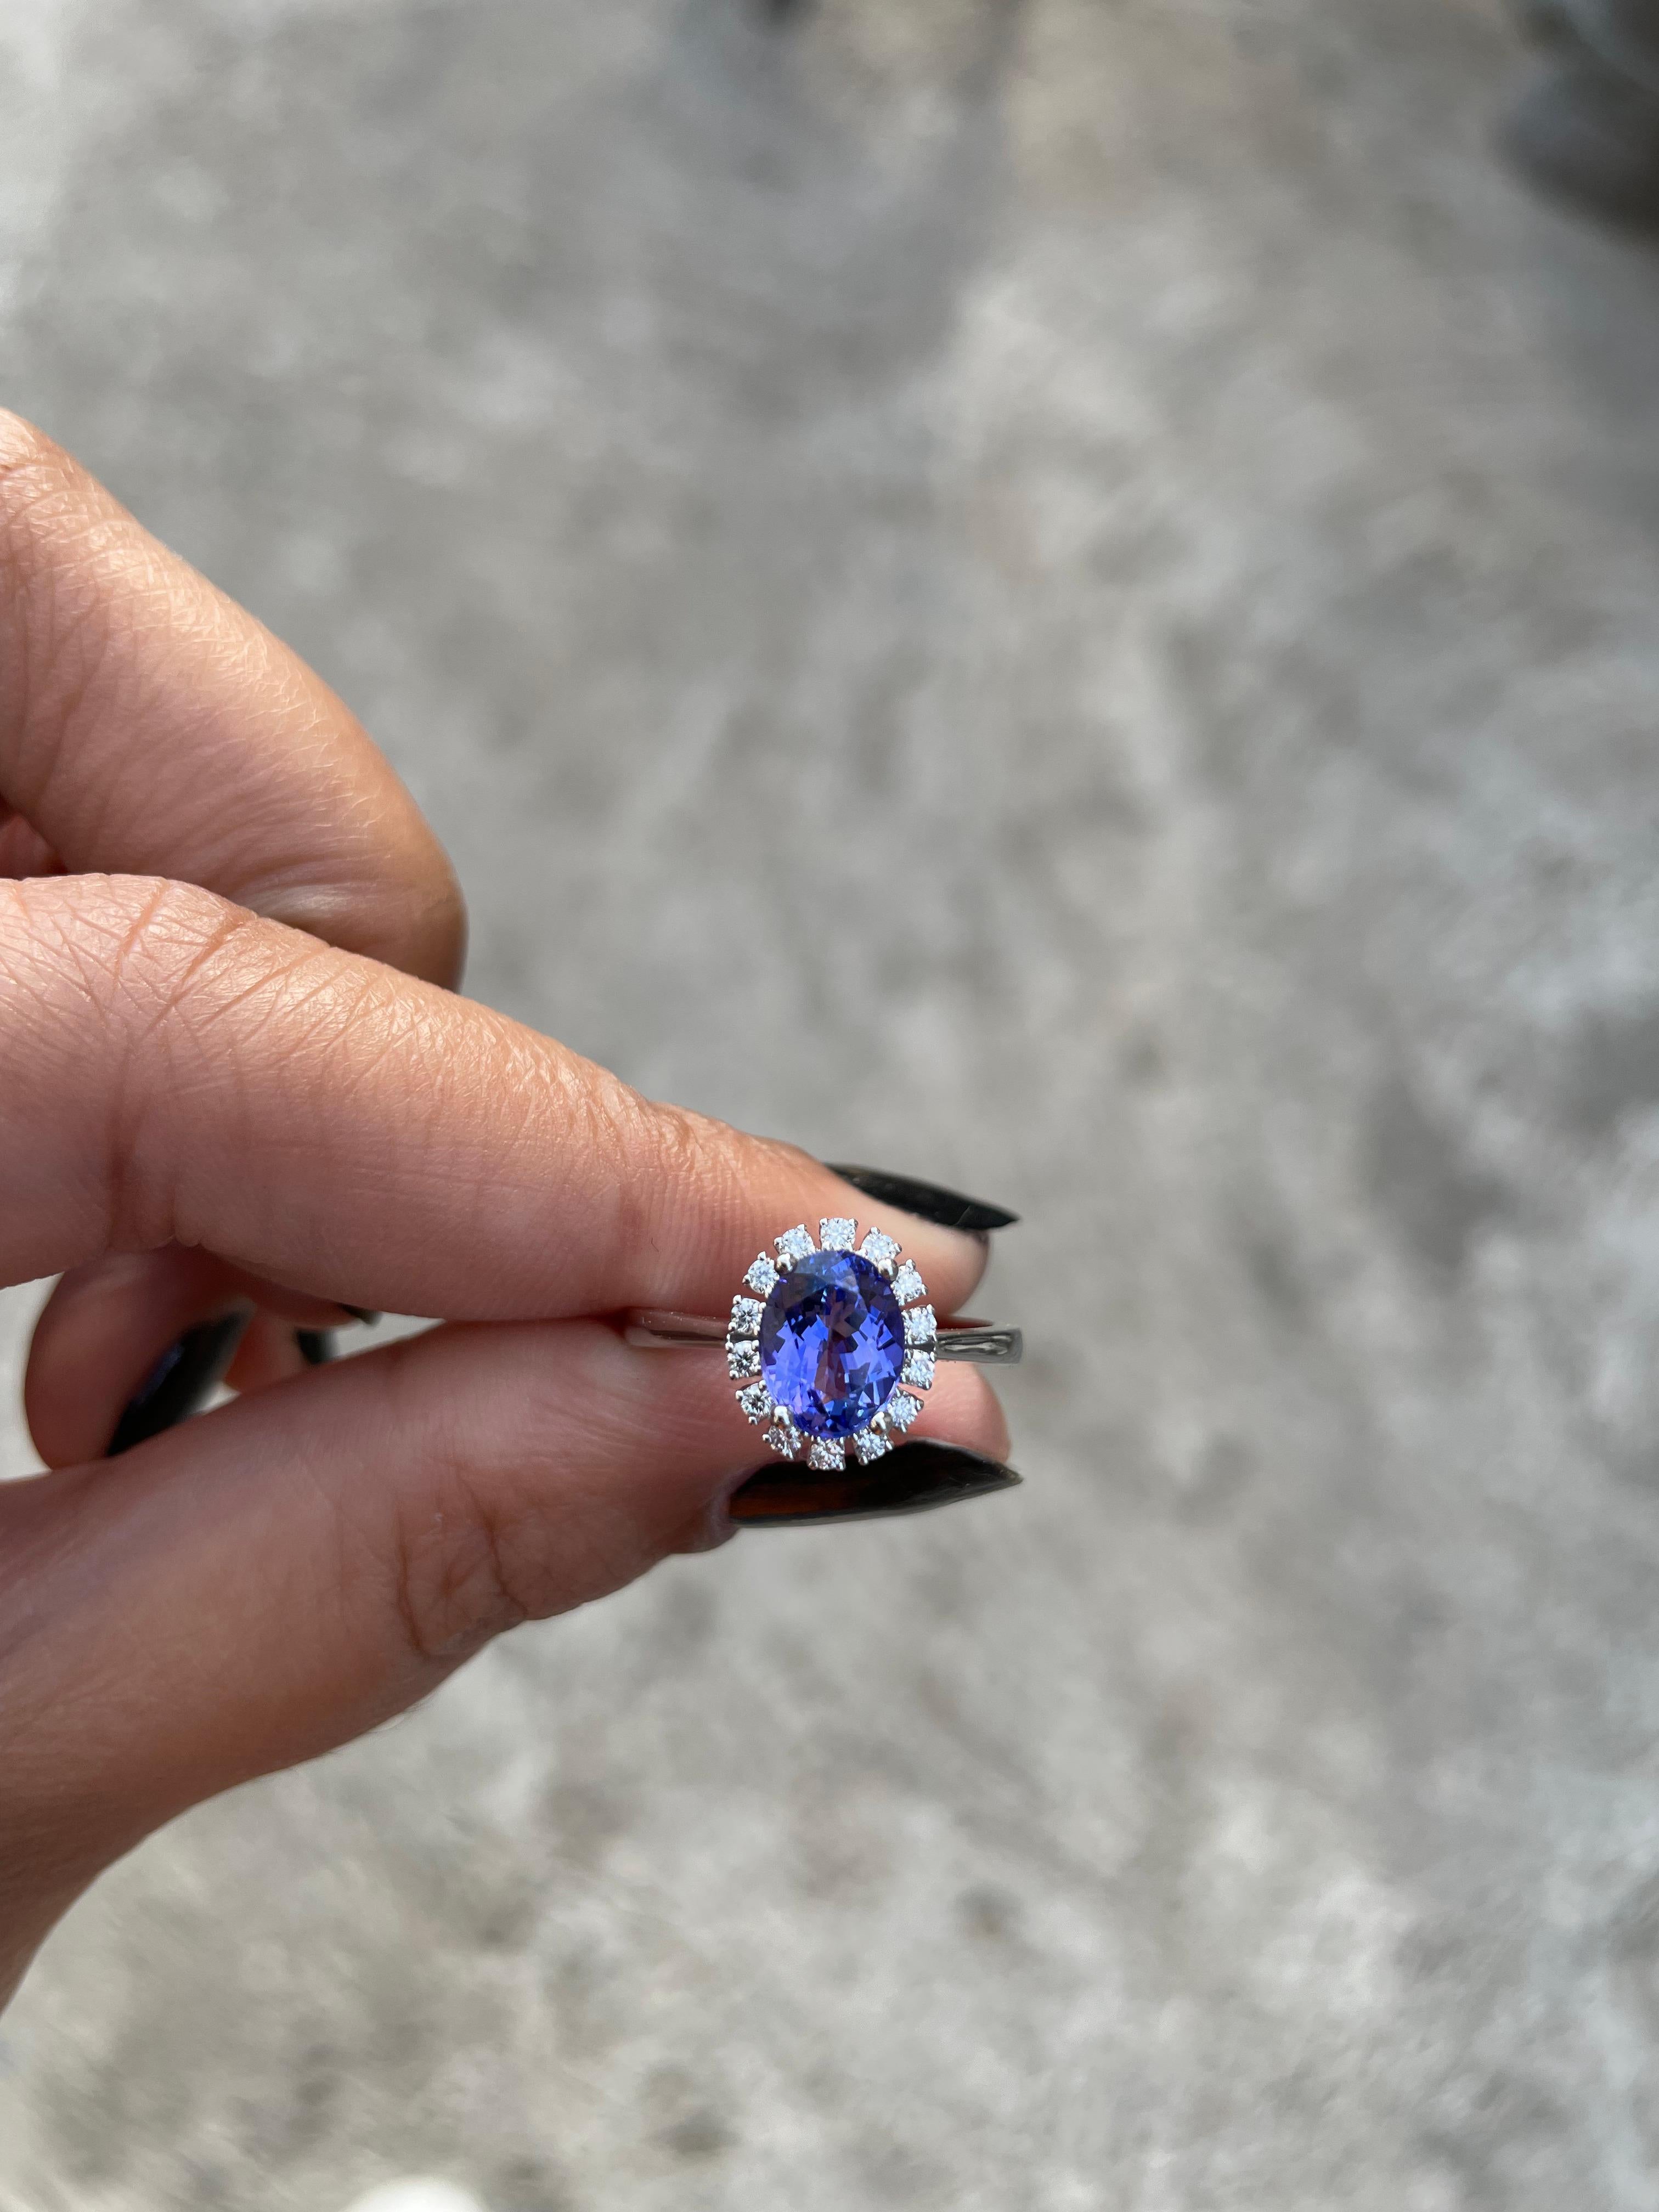 For Sale:  18k Solid White Gold Tanzanite and Diamond Ring  5